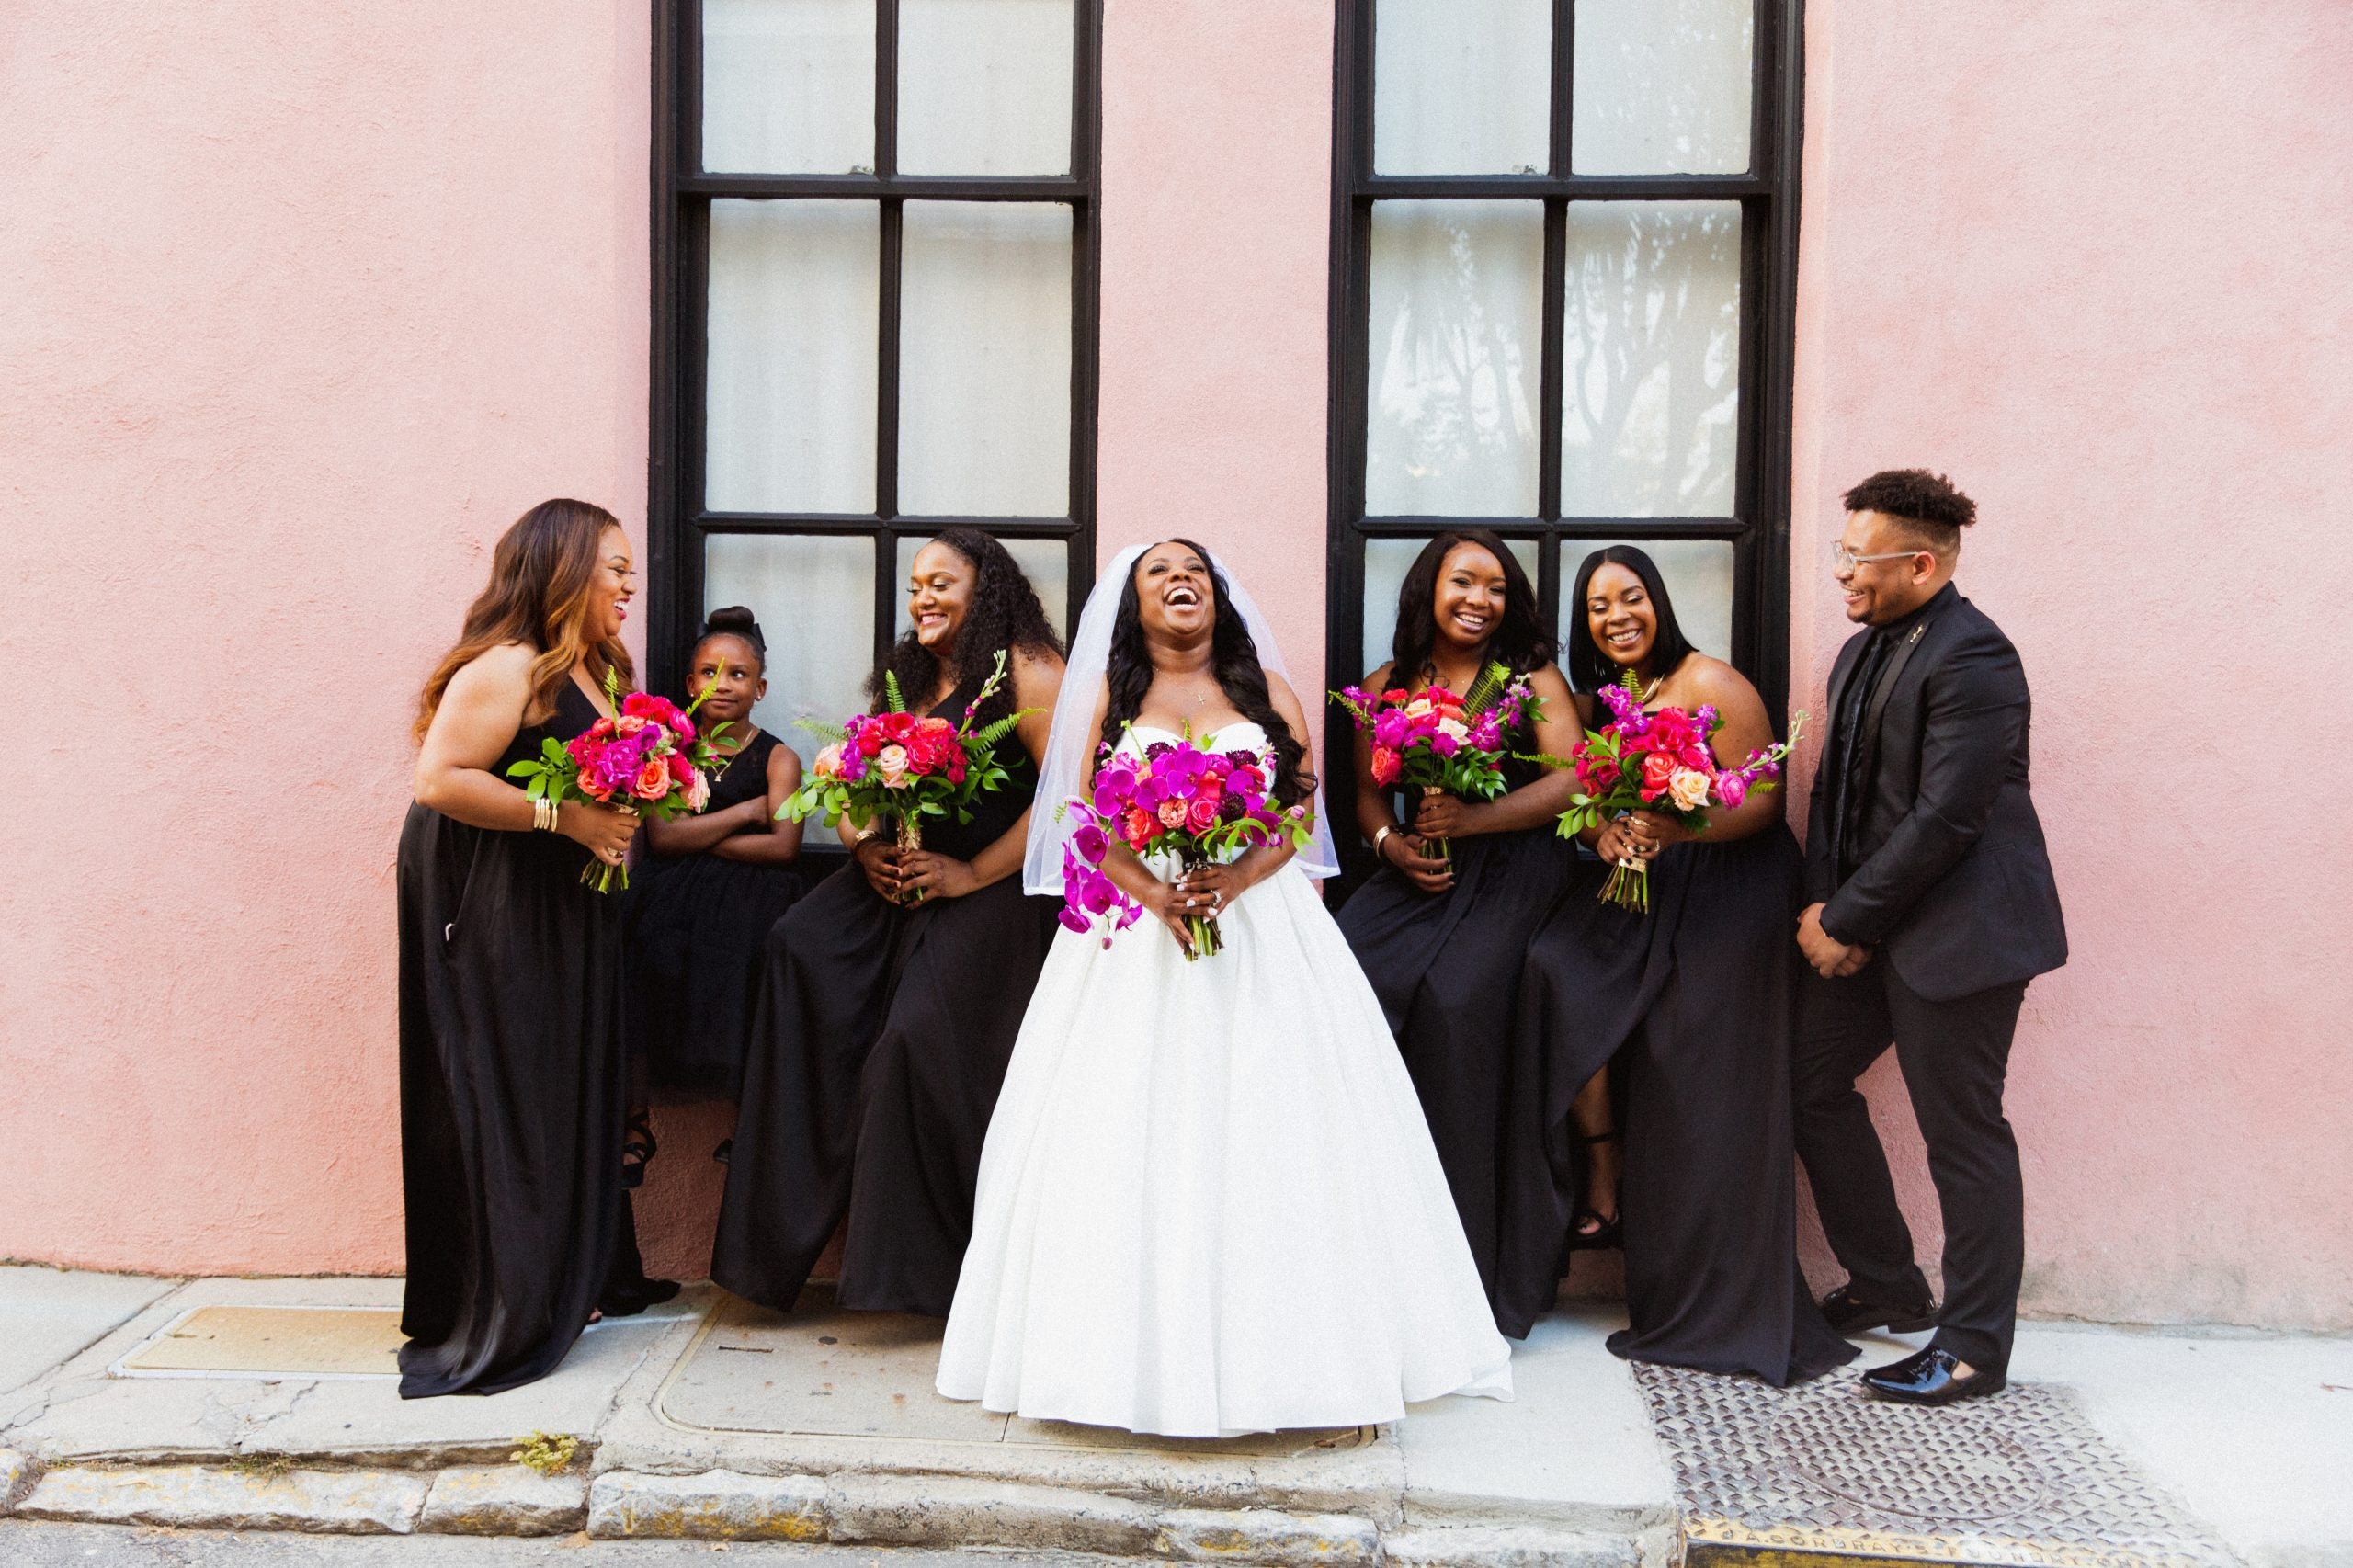 Bridal Bliss: Ashley And Richard Traditional Southern Wedding Brought The Romance